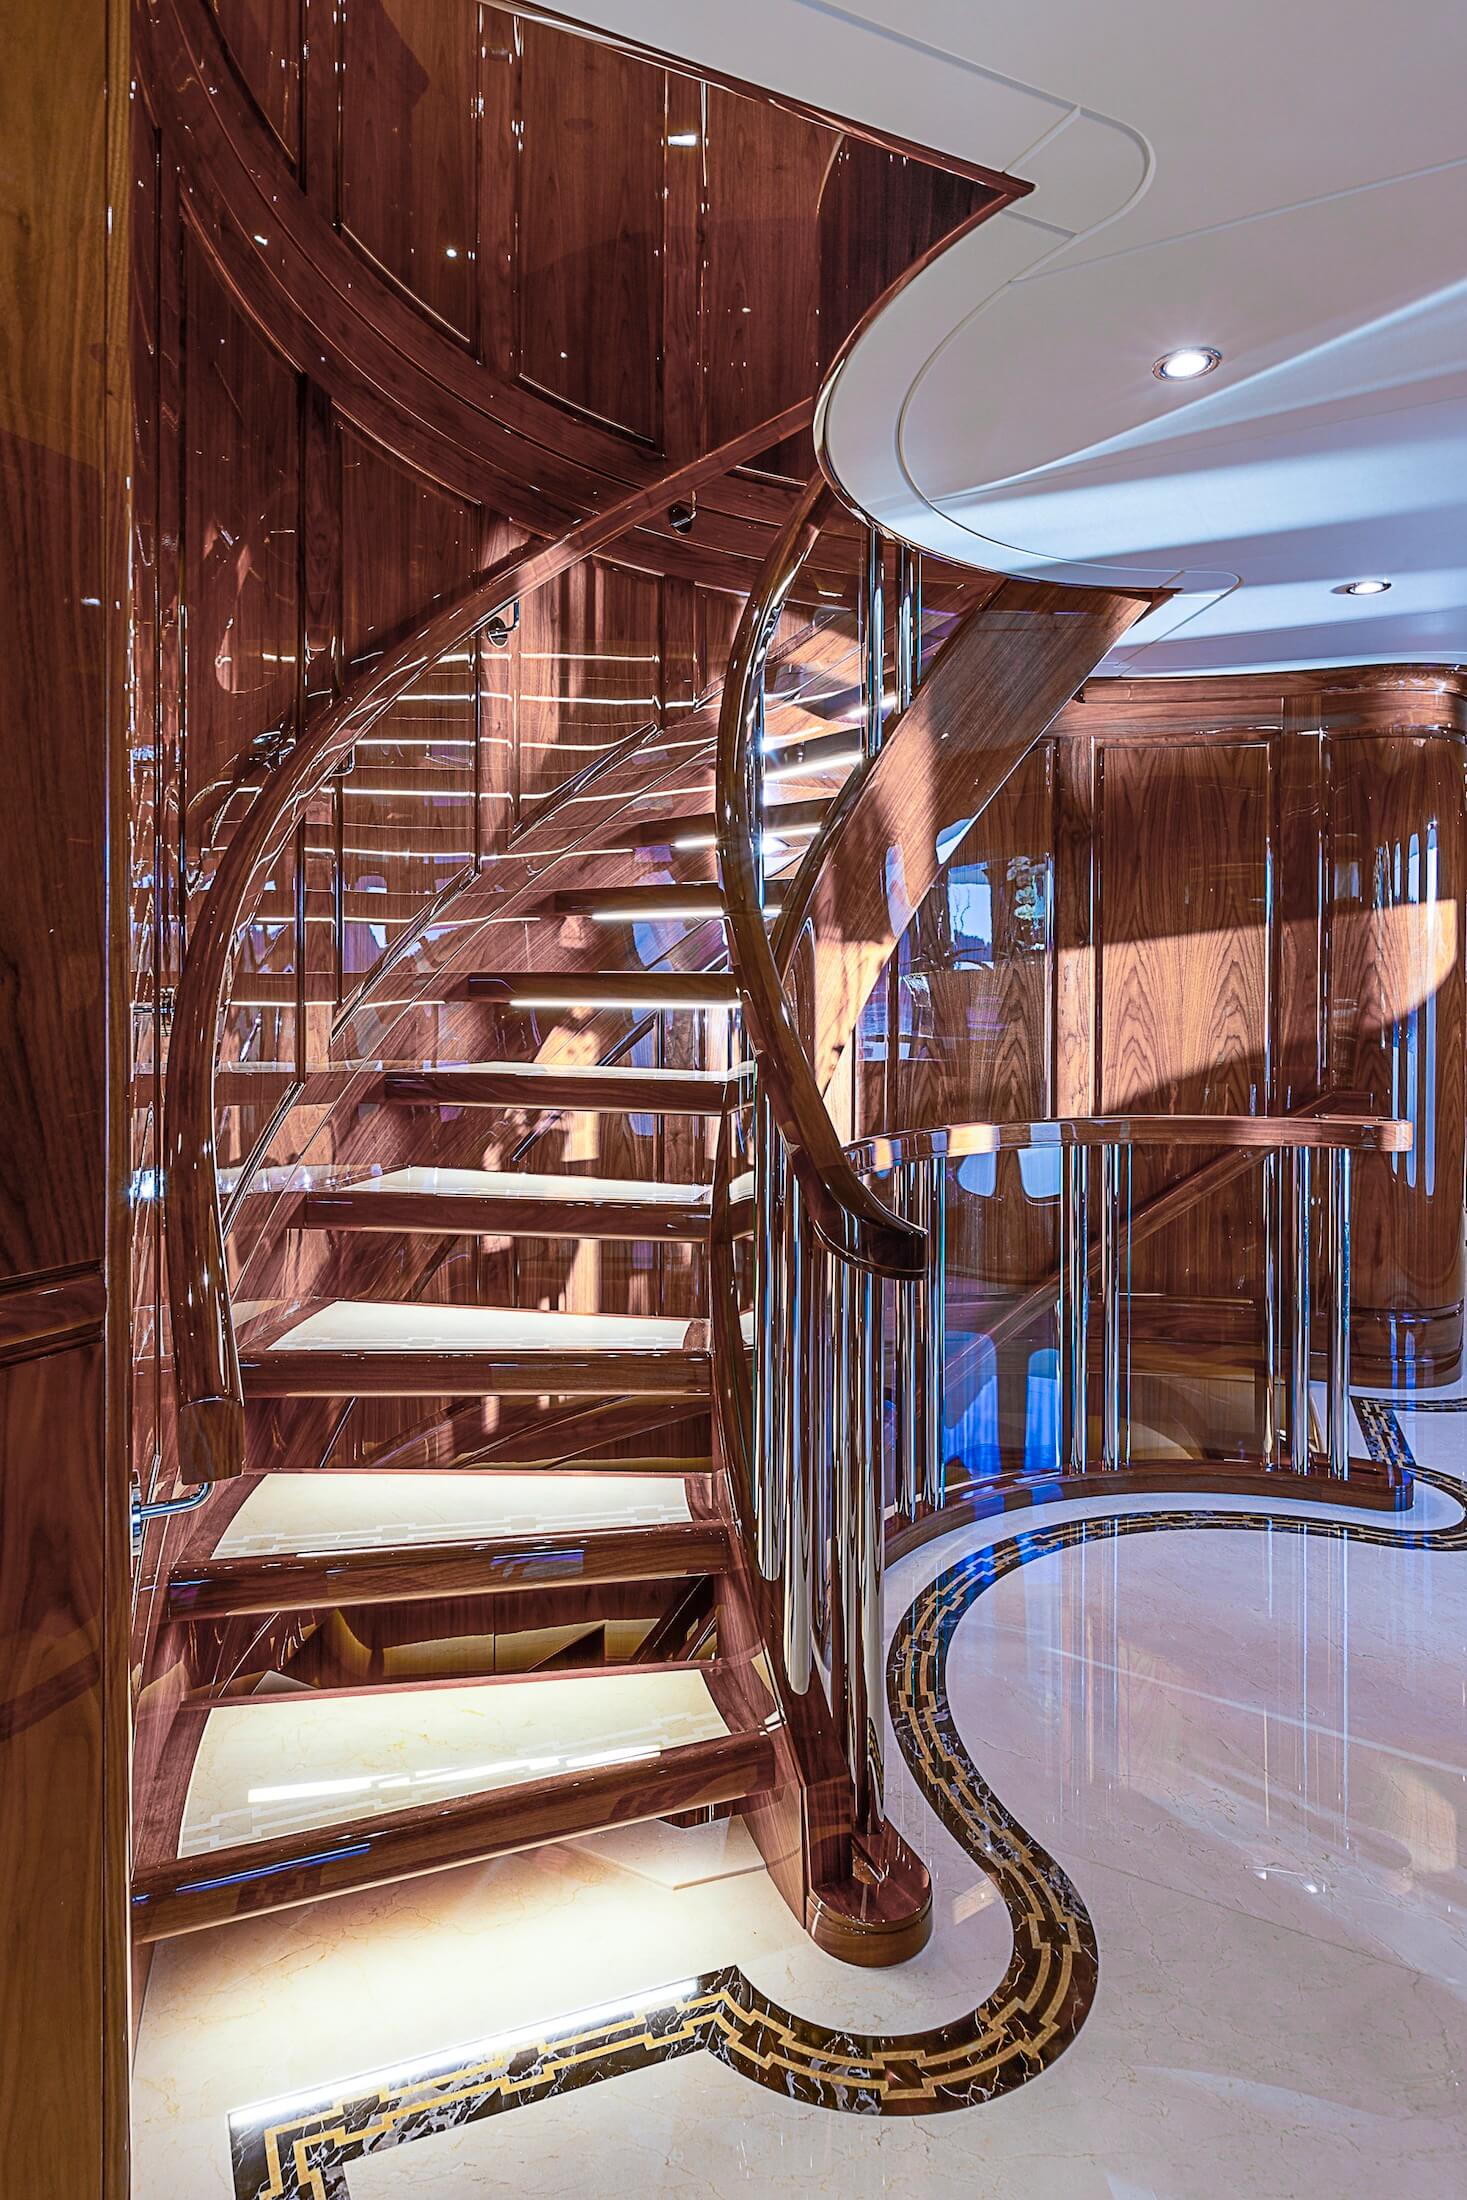 D'Natalin Luxury Yacht staircase detail